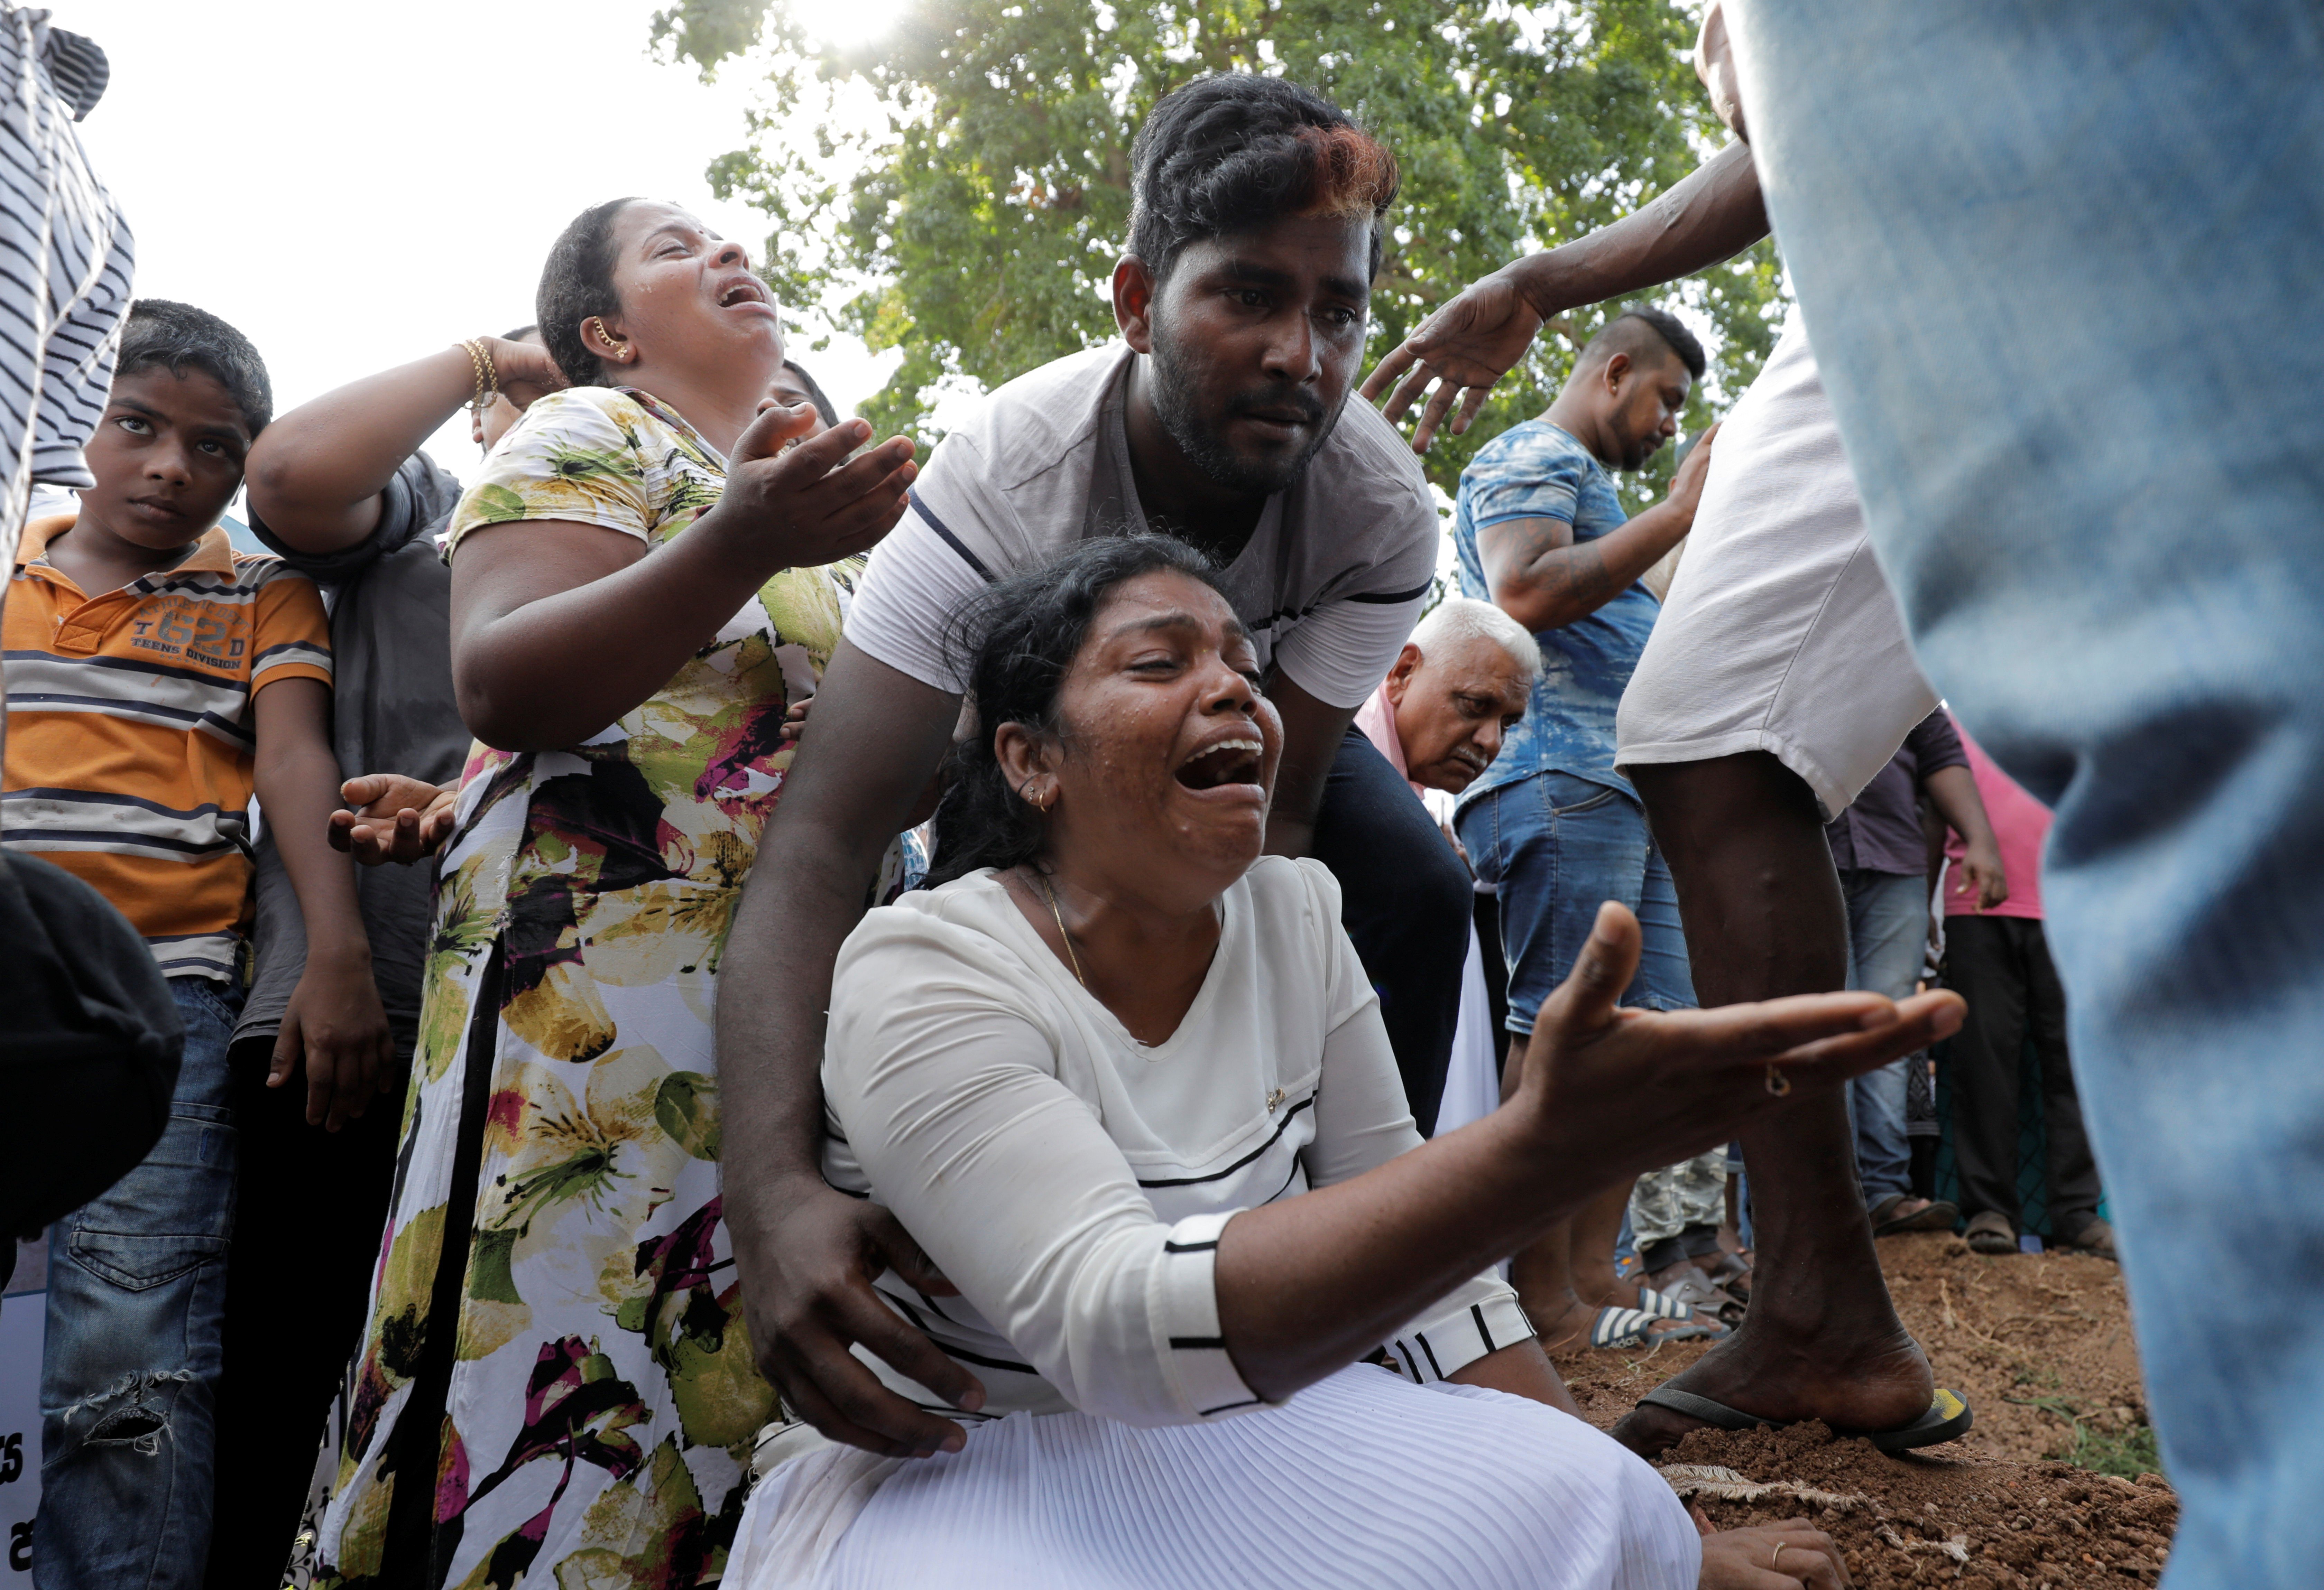 Mourners react during a mass burial of victims, two days after a string of suicide bomb attacks on churches and luxury hotels across the island on Easter Sunday, in Colombo, Sri Lanka April 23, 2019. REUTERS/Dinuka Liyanawatte